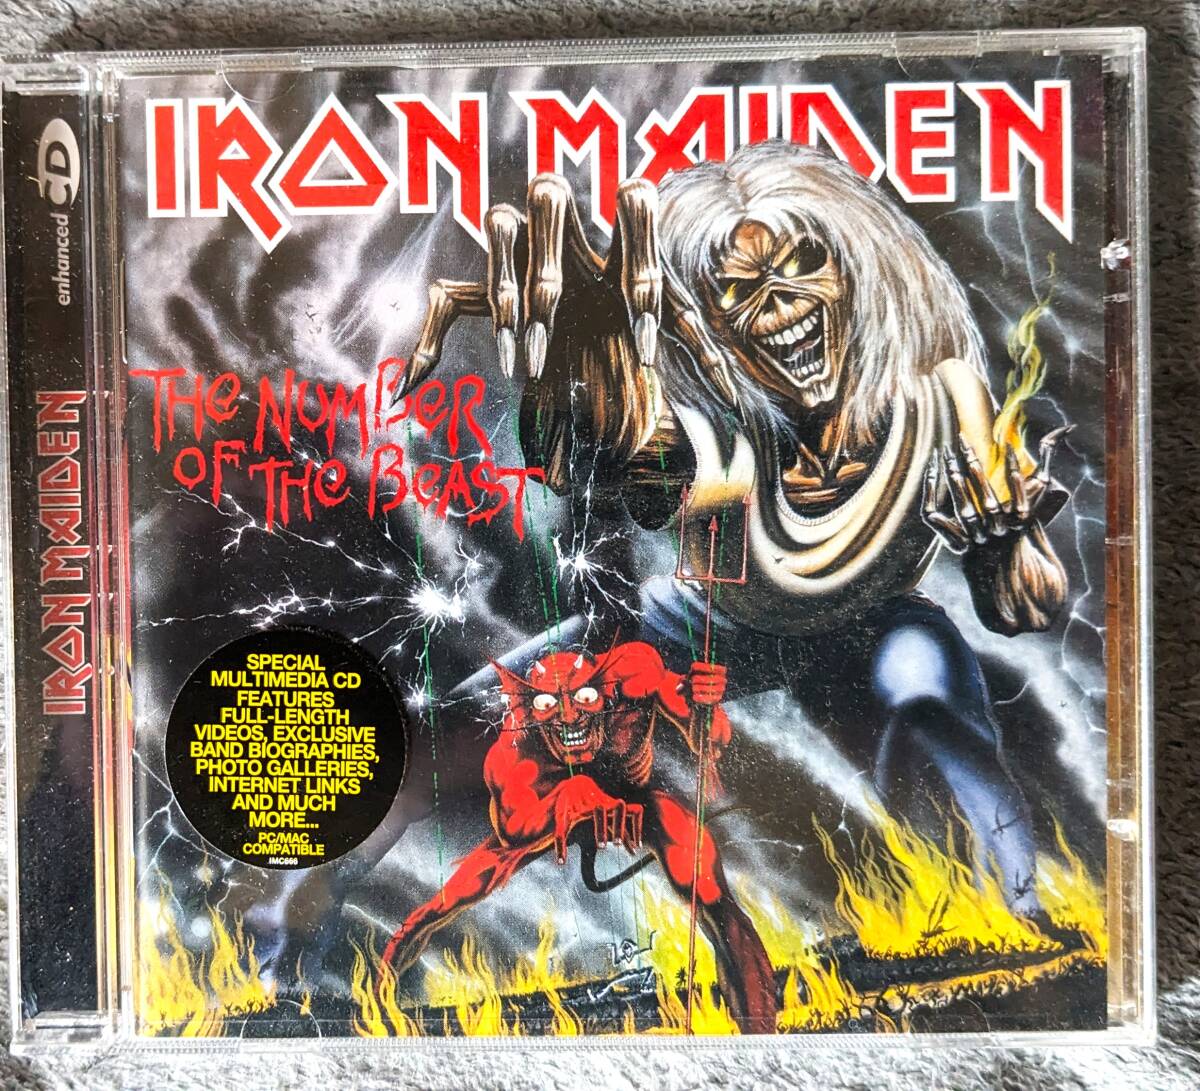 [ including in a package possible ]THE NUMBER OF THE BEAST IRON MAIDEN iron * Maiden foreign record (en handle sdo specification )